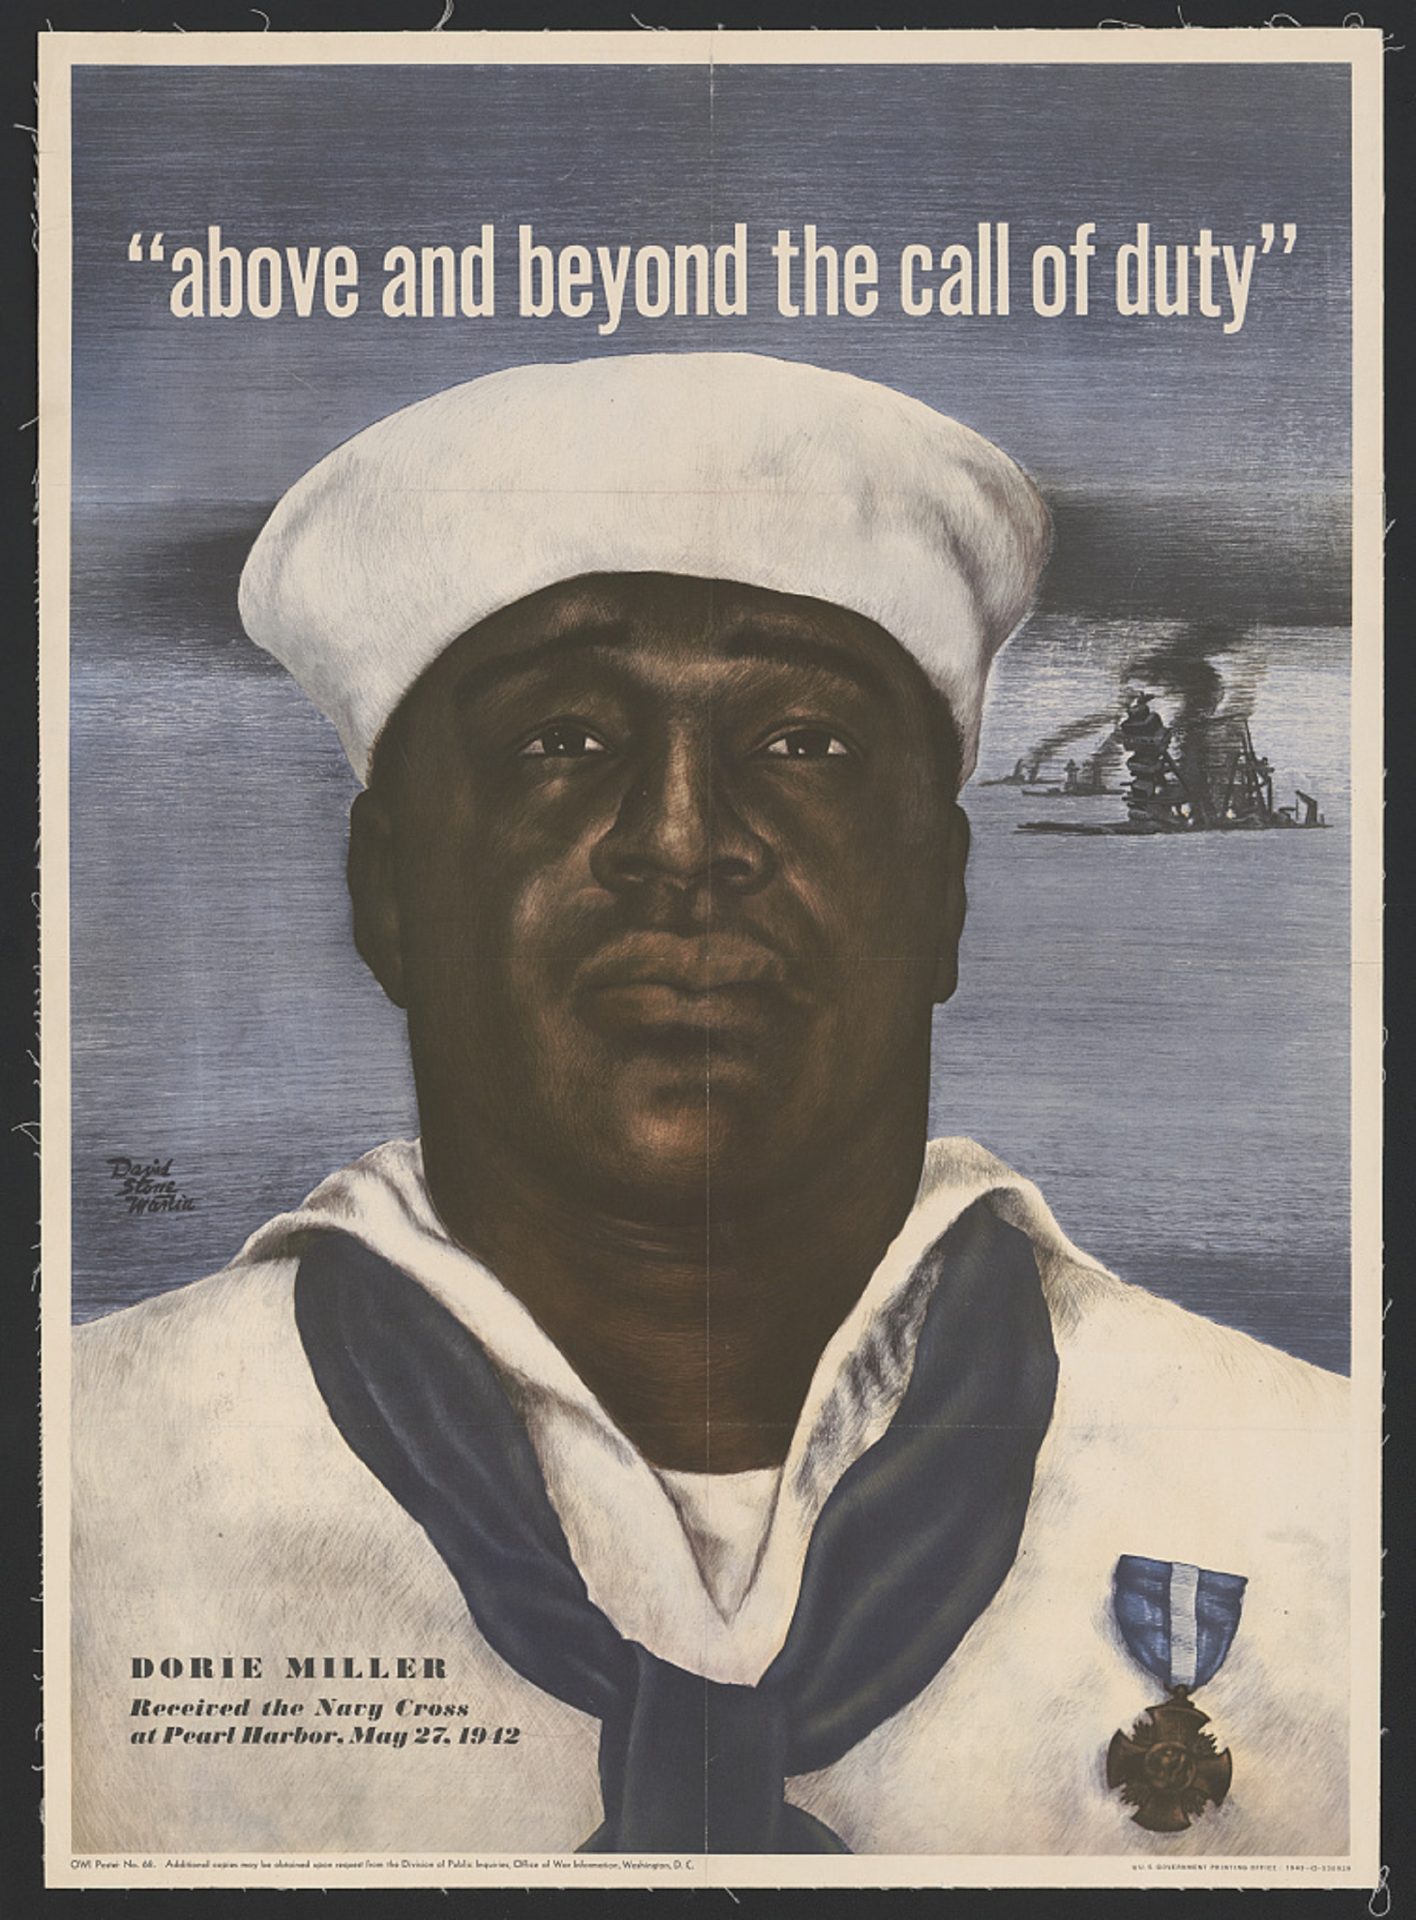 Miller's image was used in a 1943 U.S. Navy recruitment poster.